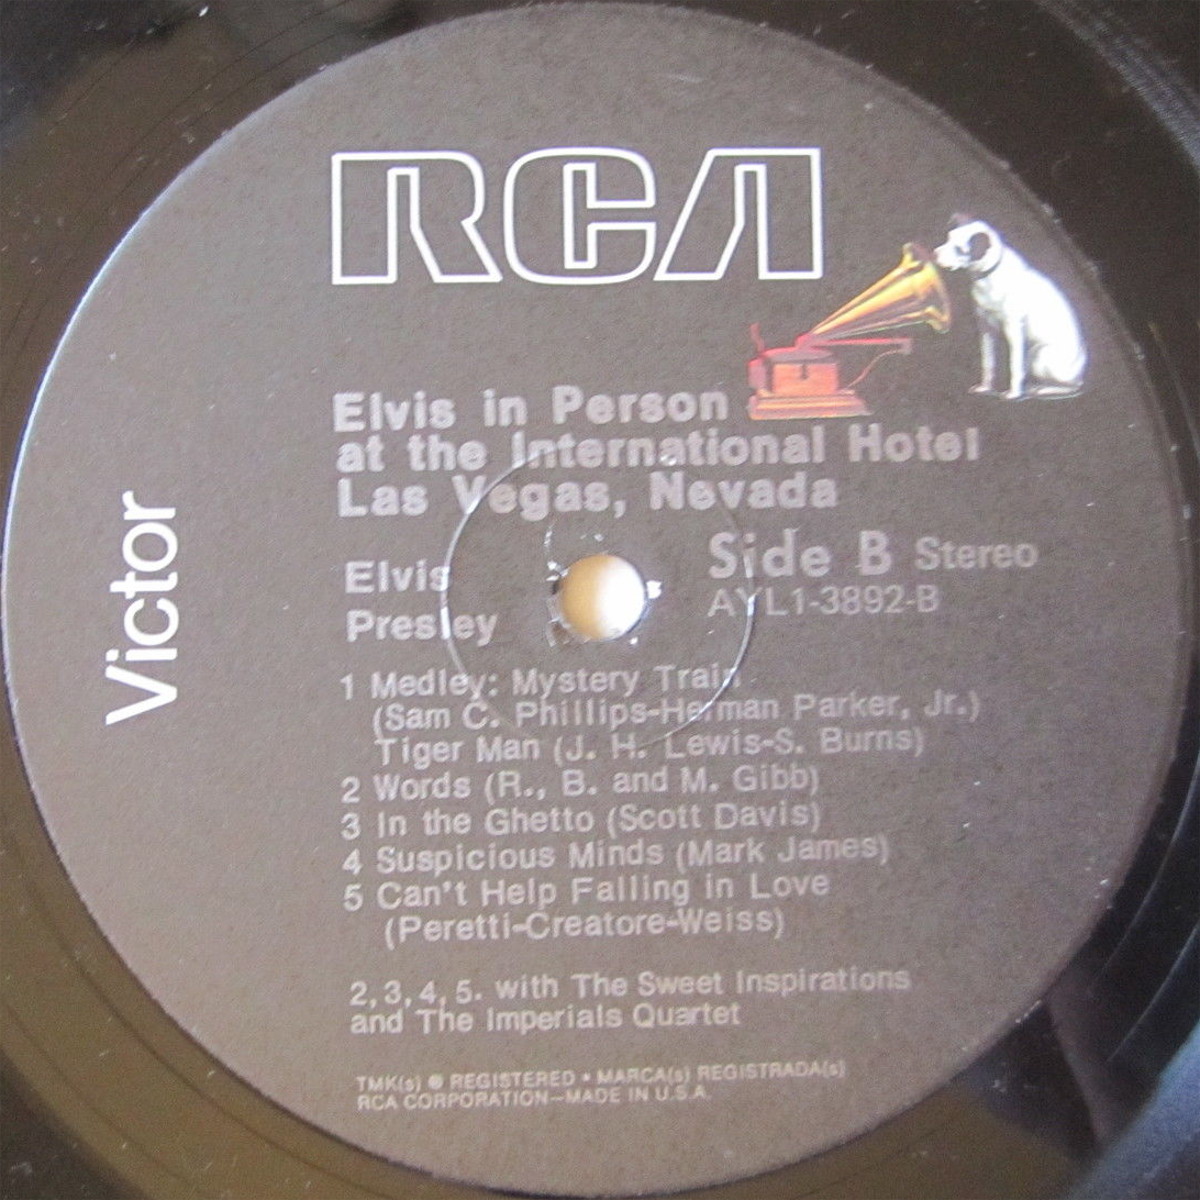 ELVIS IN PERSON AT THE INTERNATIONAL HOTEL LAS VEGAS, NEVADA Ayl1-3892d0qyof